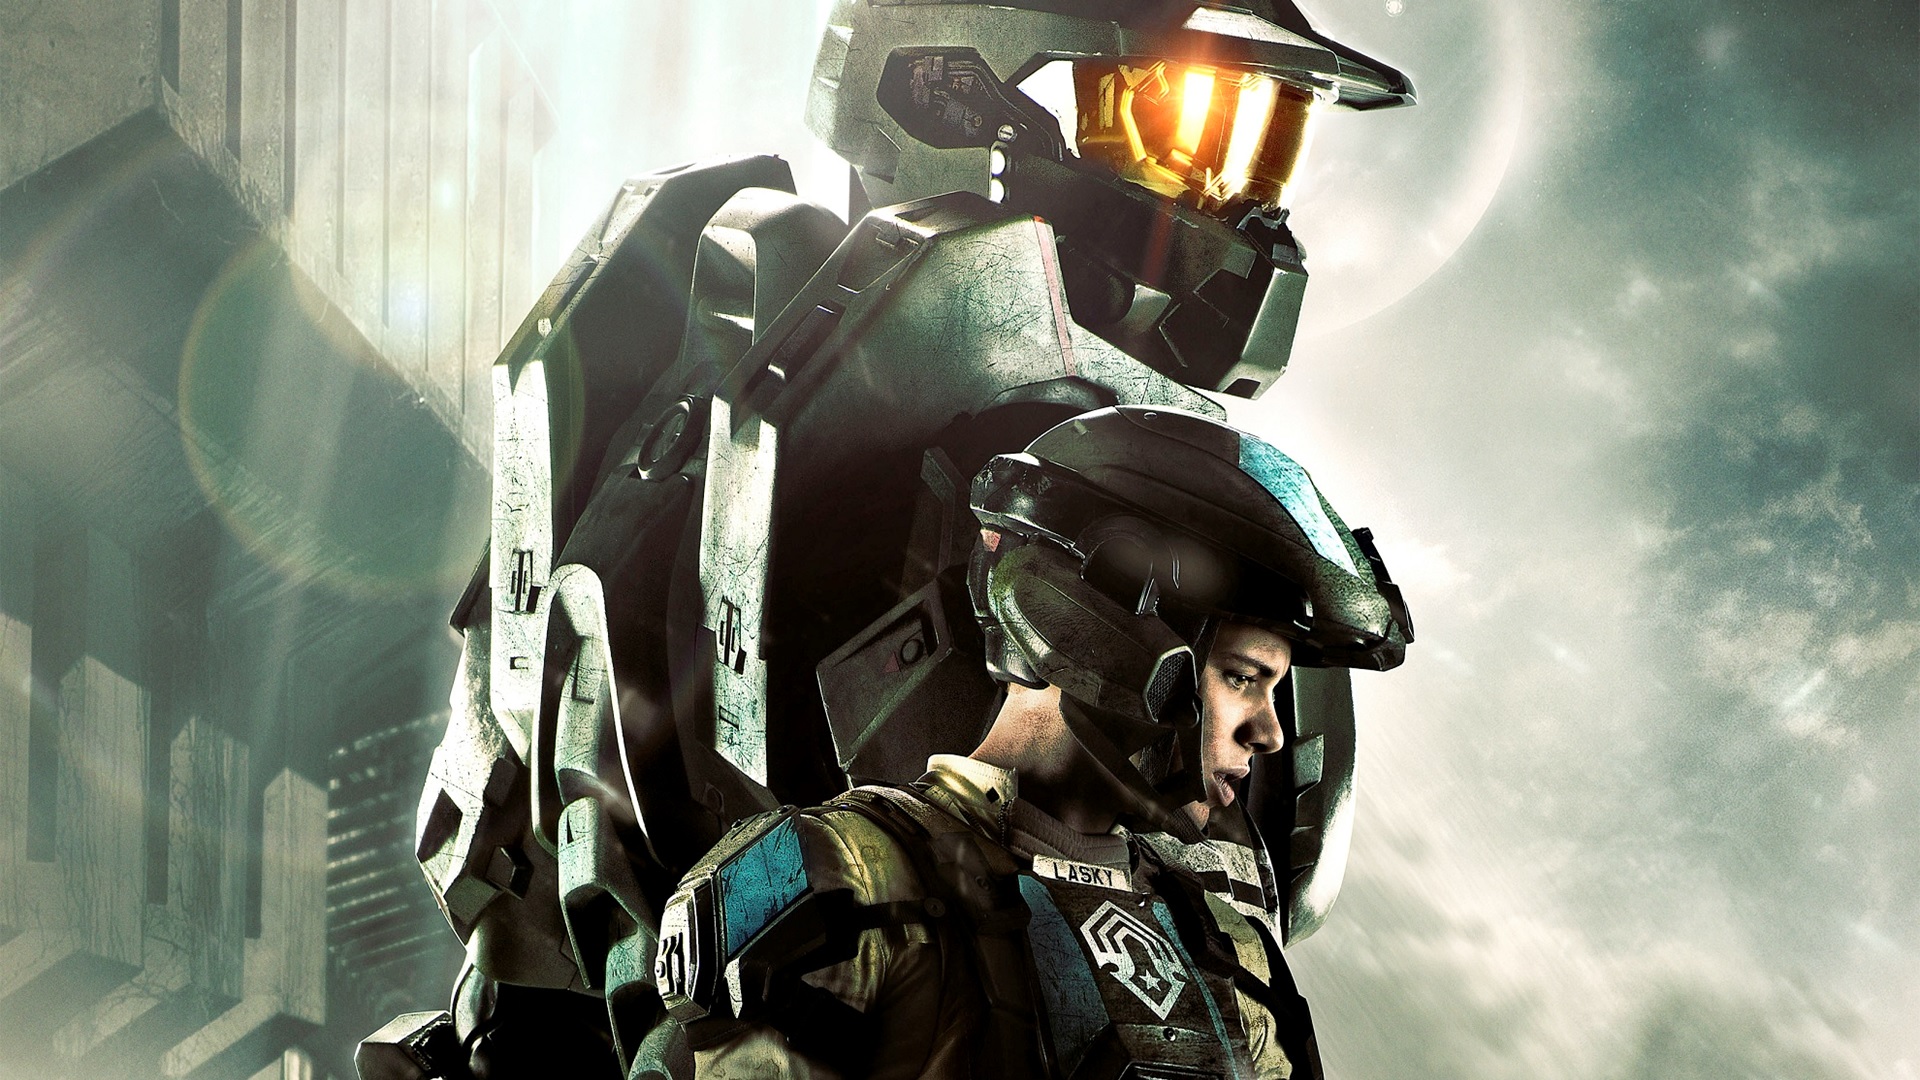 Cover image of Halo 4: Forward Unto Dawn live-action series